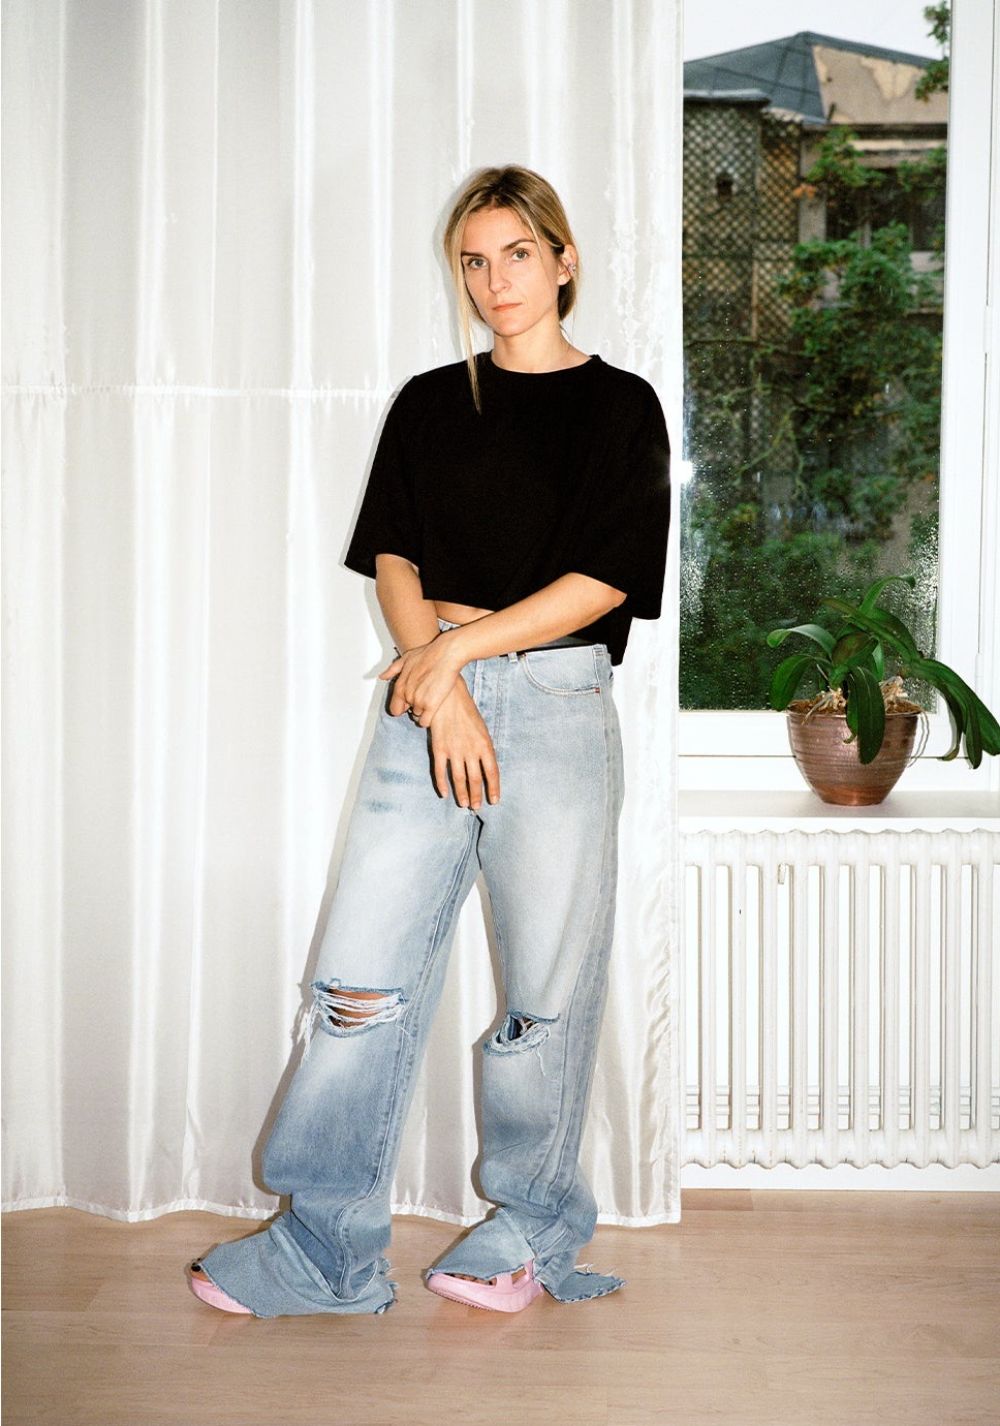 Gaia Repossi by Jack Day for Matches Fashion Fall-Winter Wardrobe Edit Vaara Black Kelly cropped cotton-jersey T-shirt Vetements Blue Split-cuff wide-leg denim jeans Givenchy Pink Marshmallow cutout slides